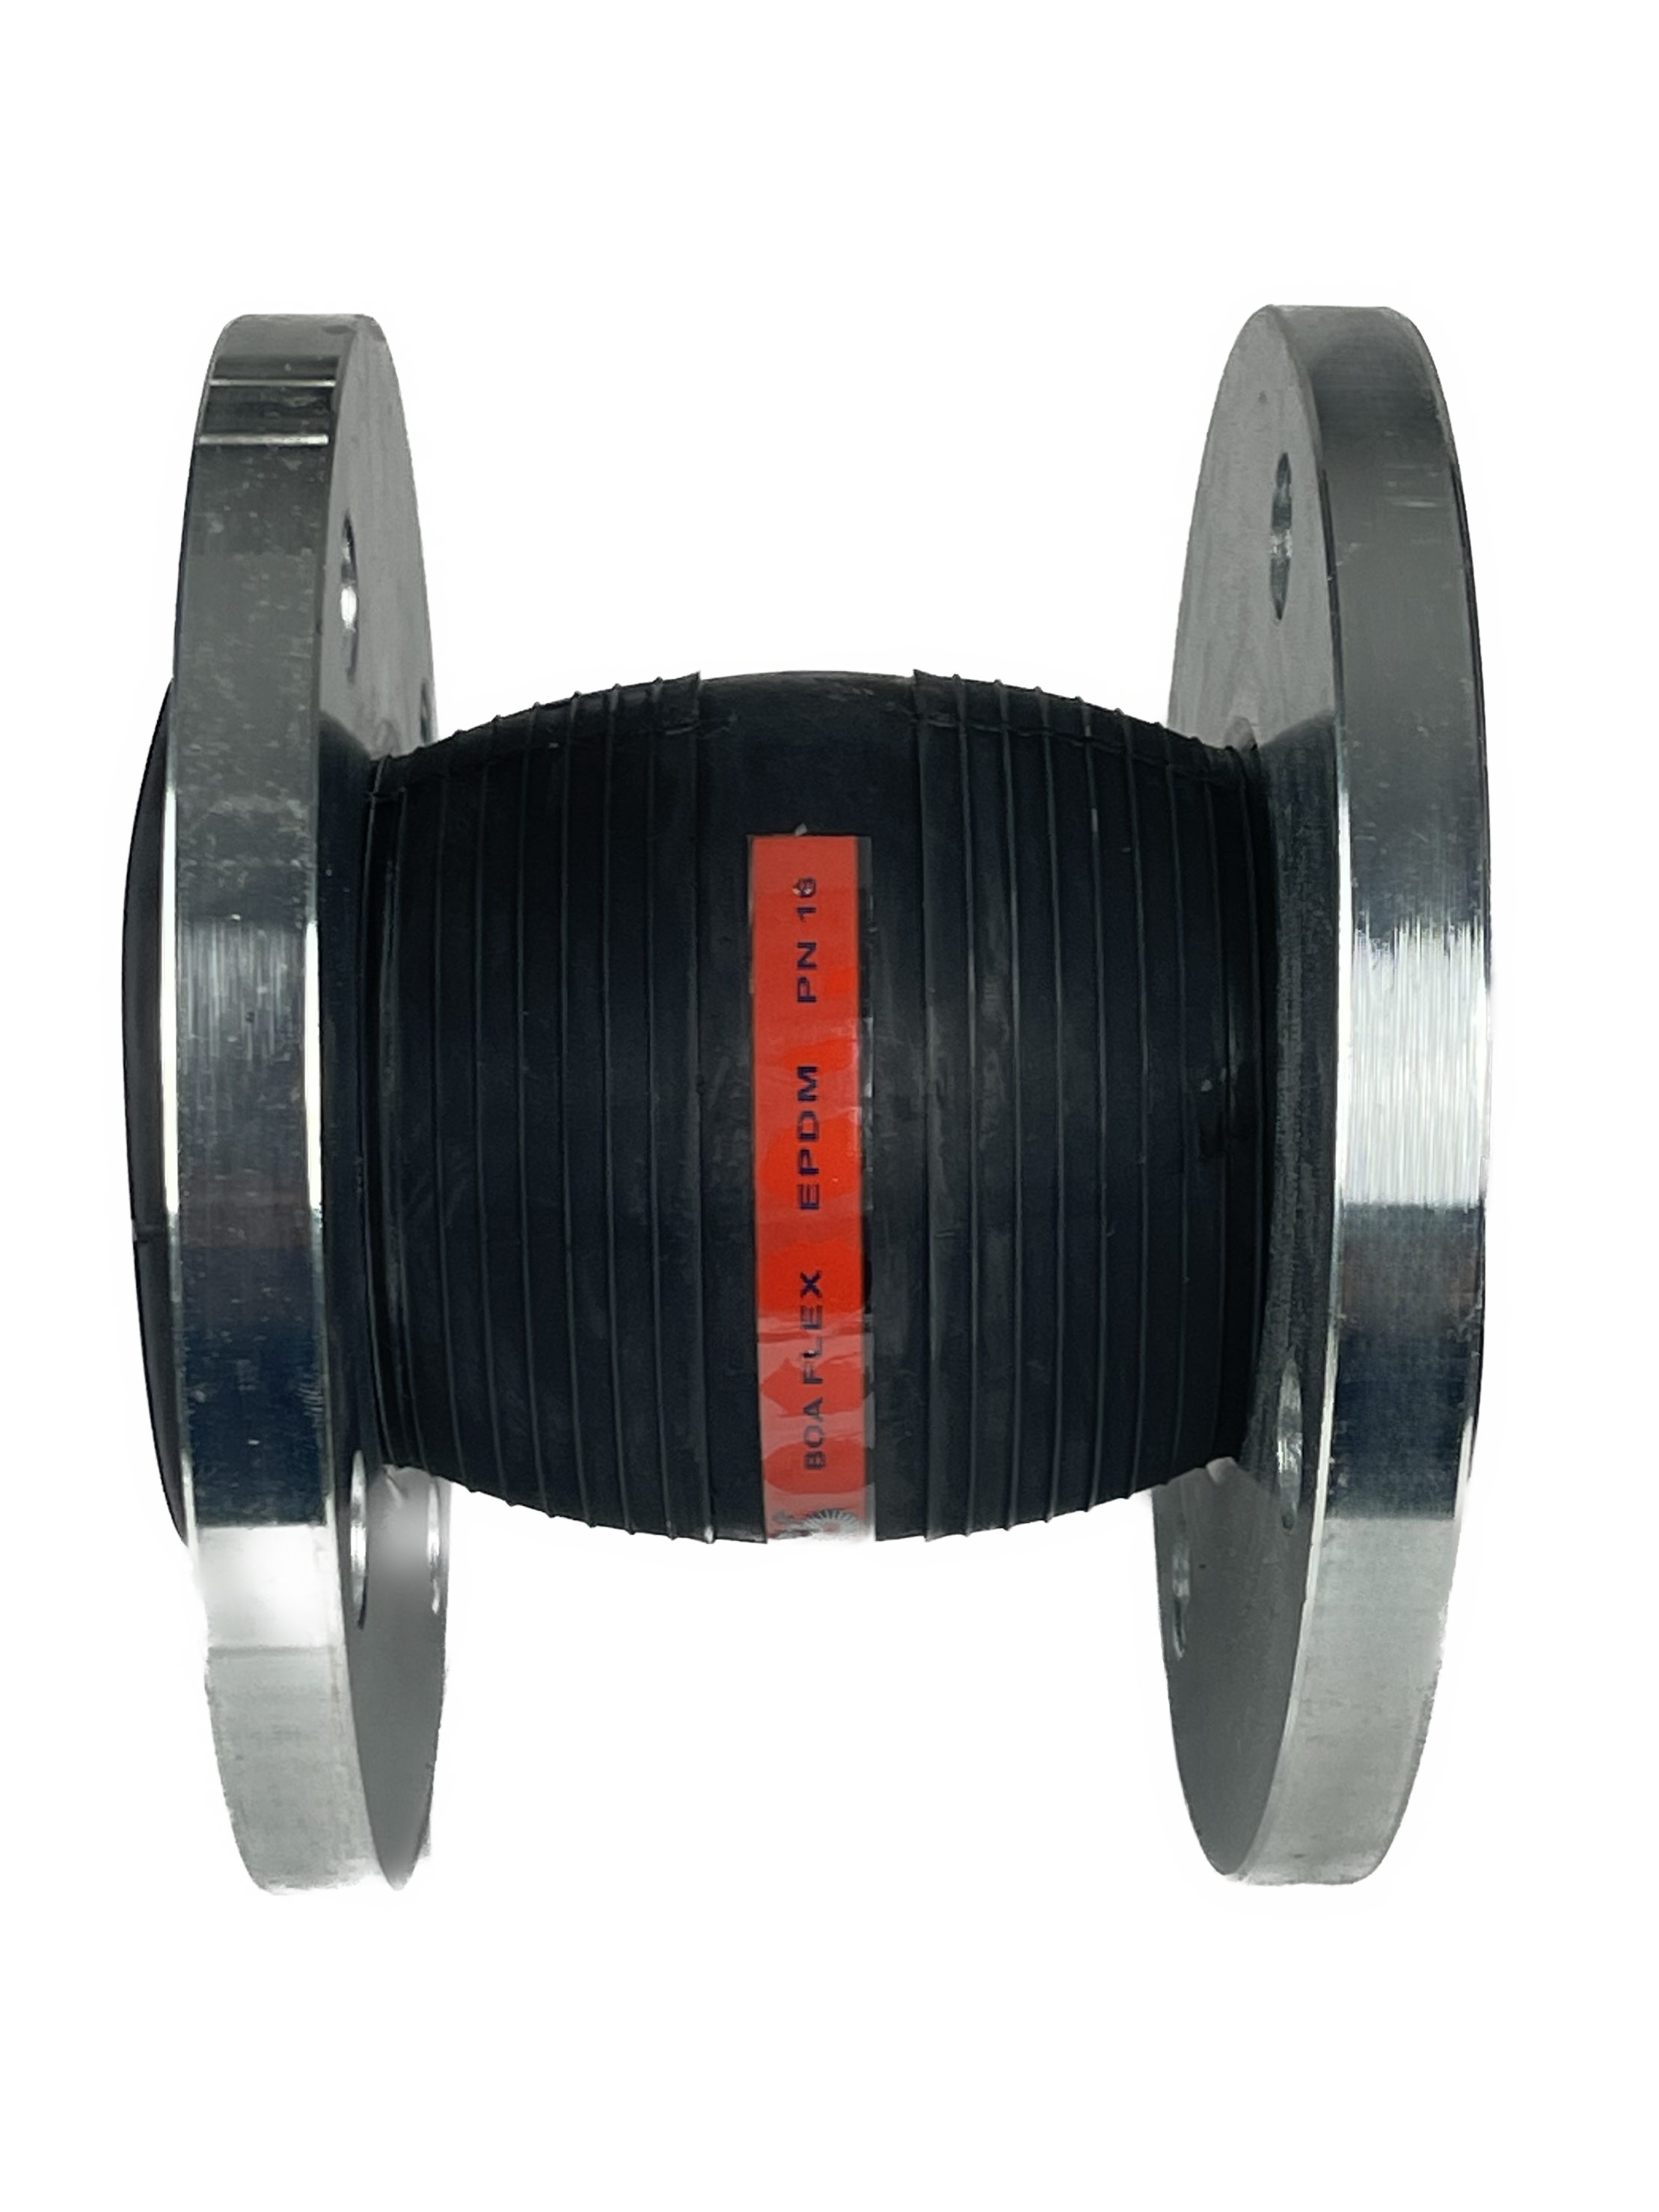 Rubber Expansion Joints with loose flanges - Typ BOA 314-U-D-EPDM